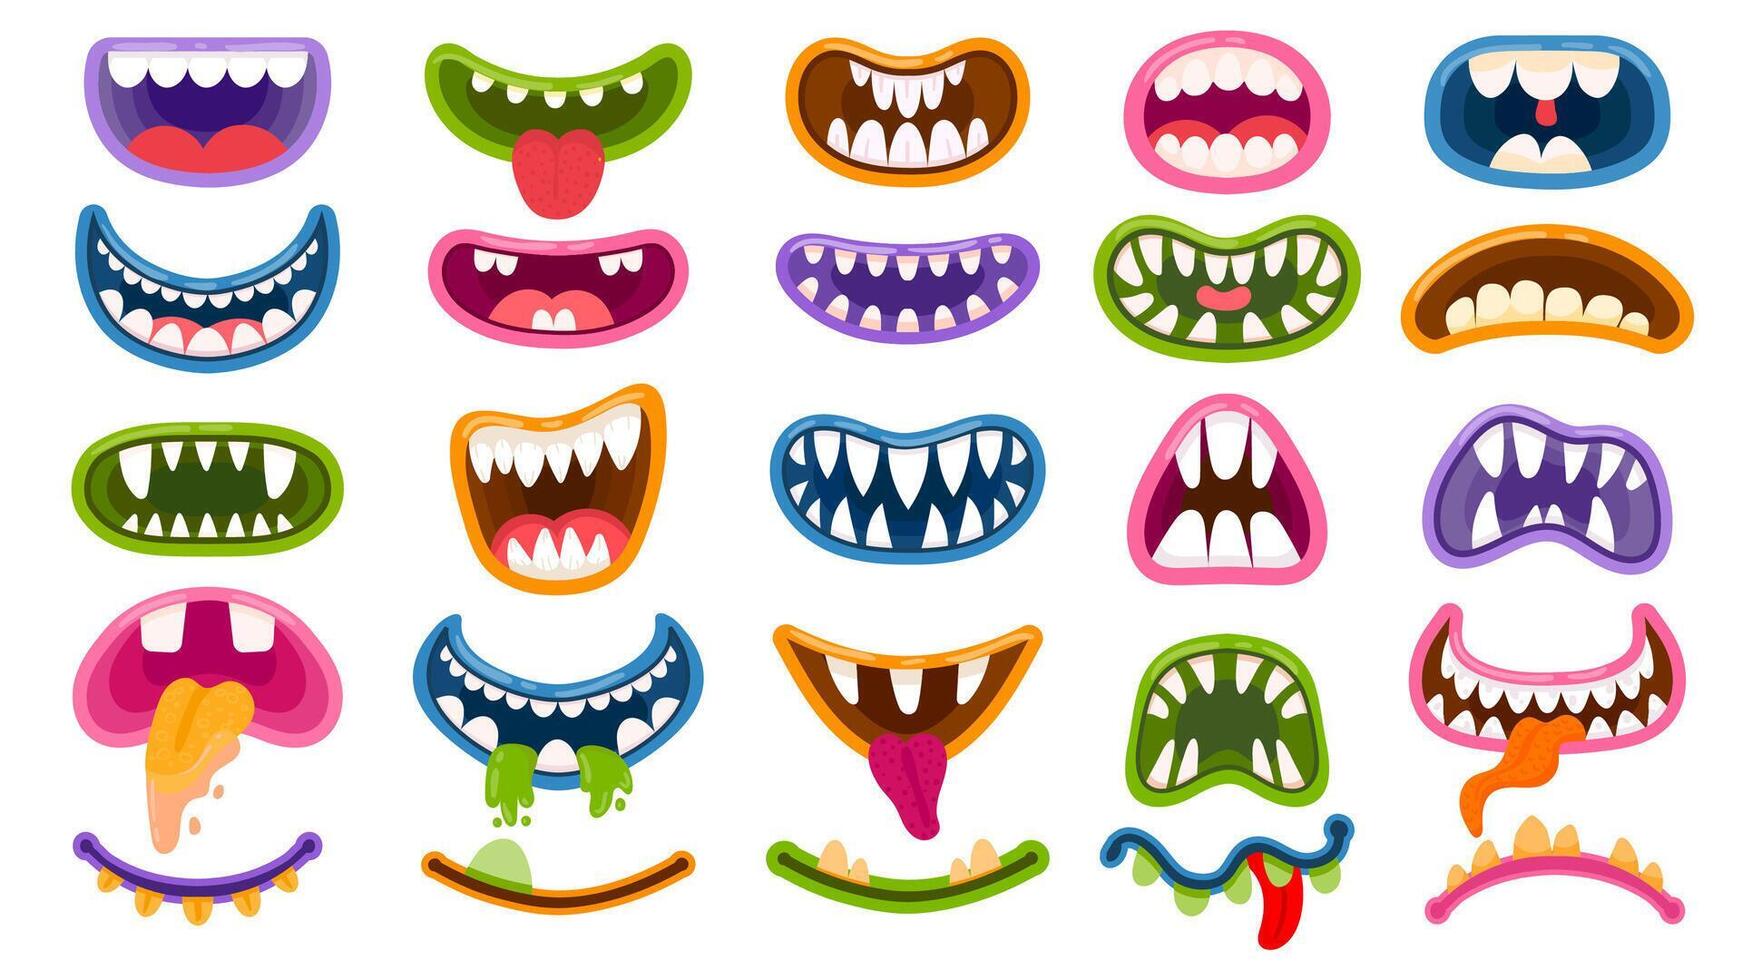 Cartoon monster mouths. Scary and funny mouth with teeth and tongue. Halloween masks, monsters joker laugh and creepy clown smile vector set